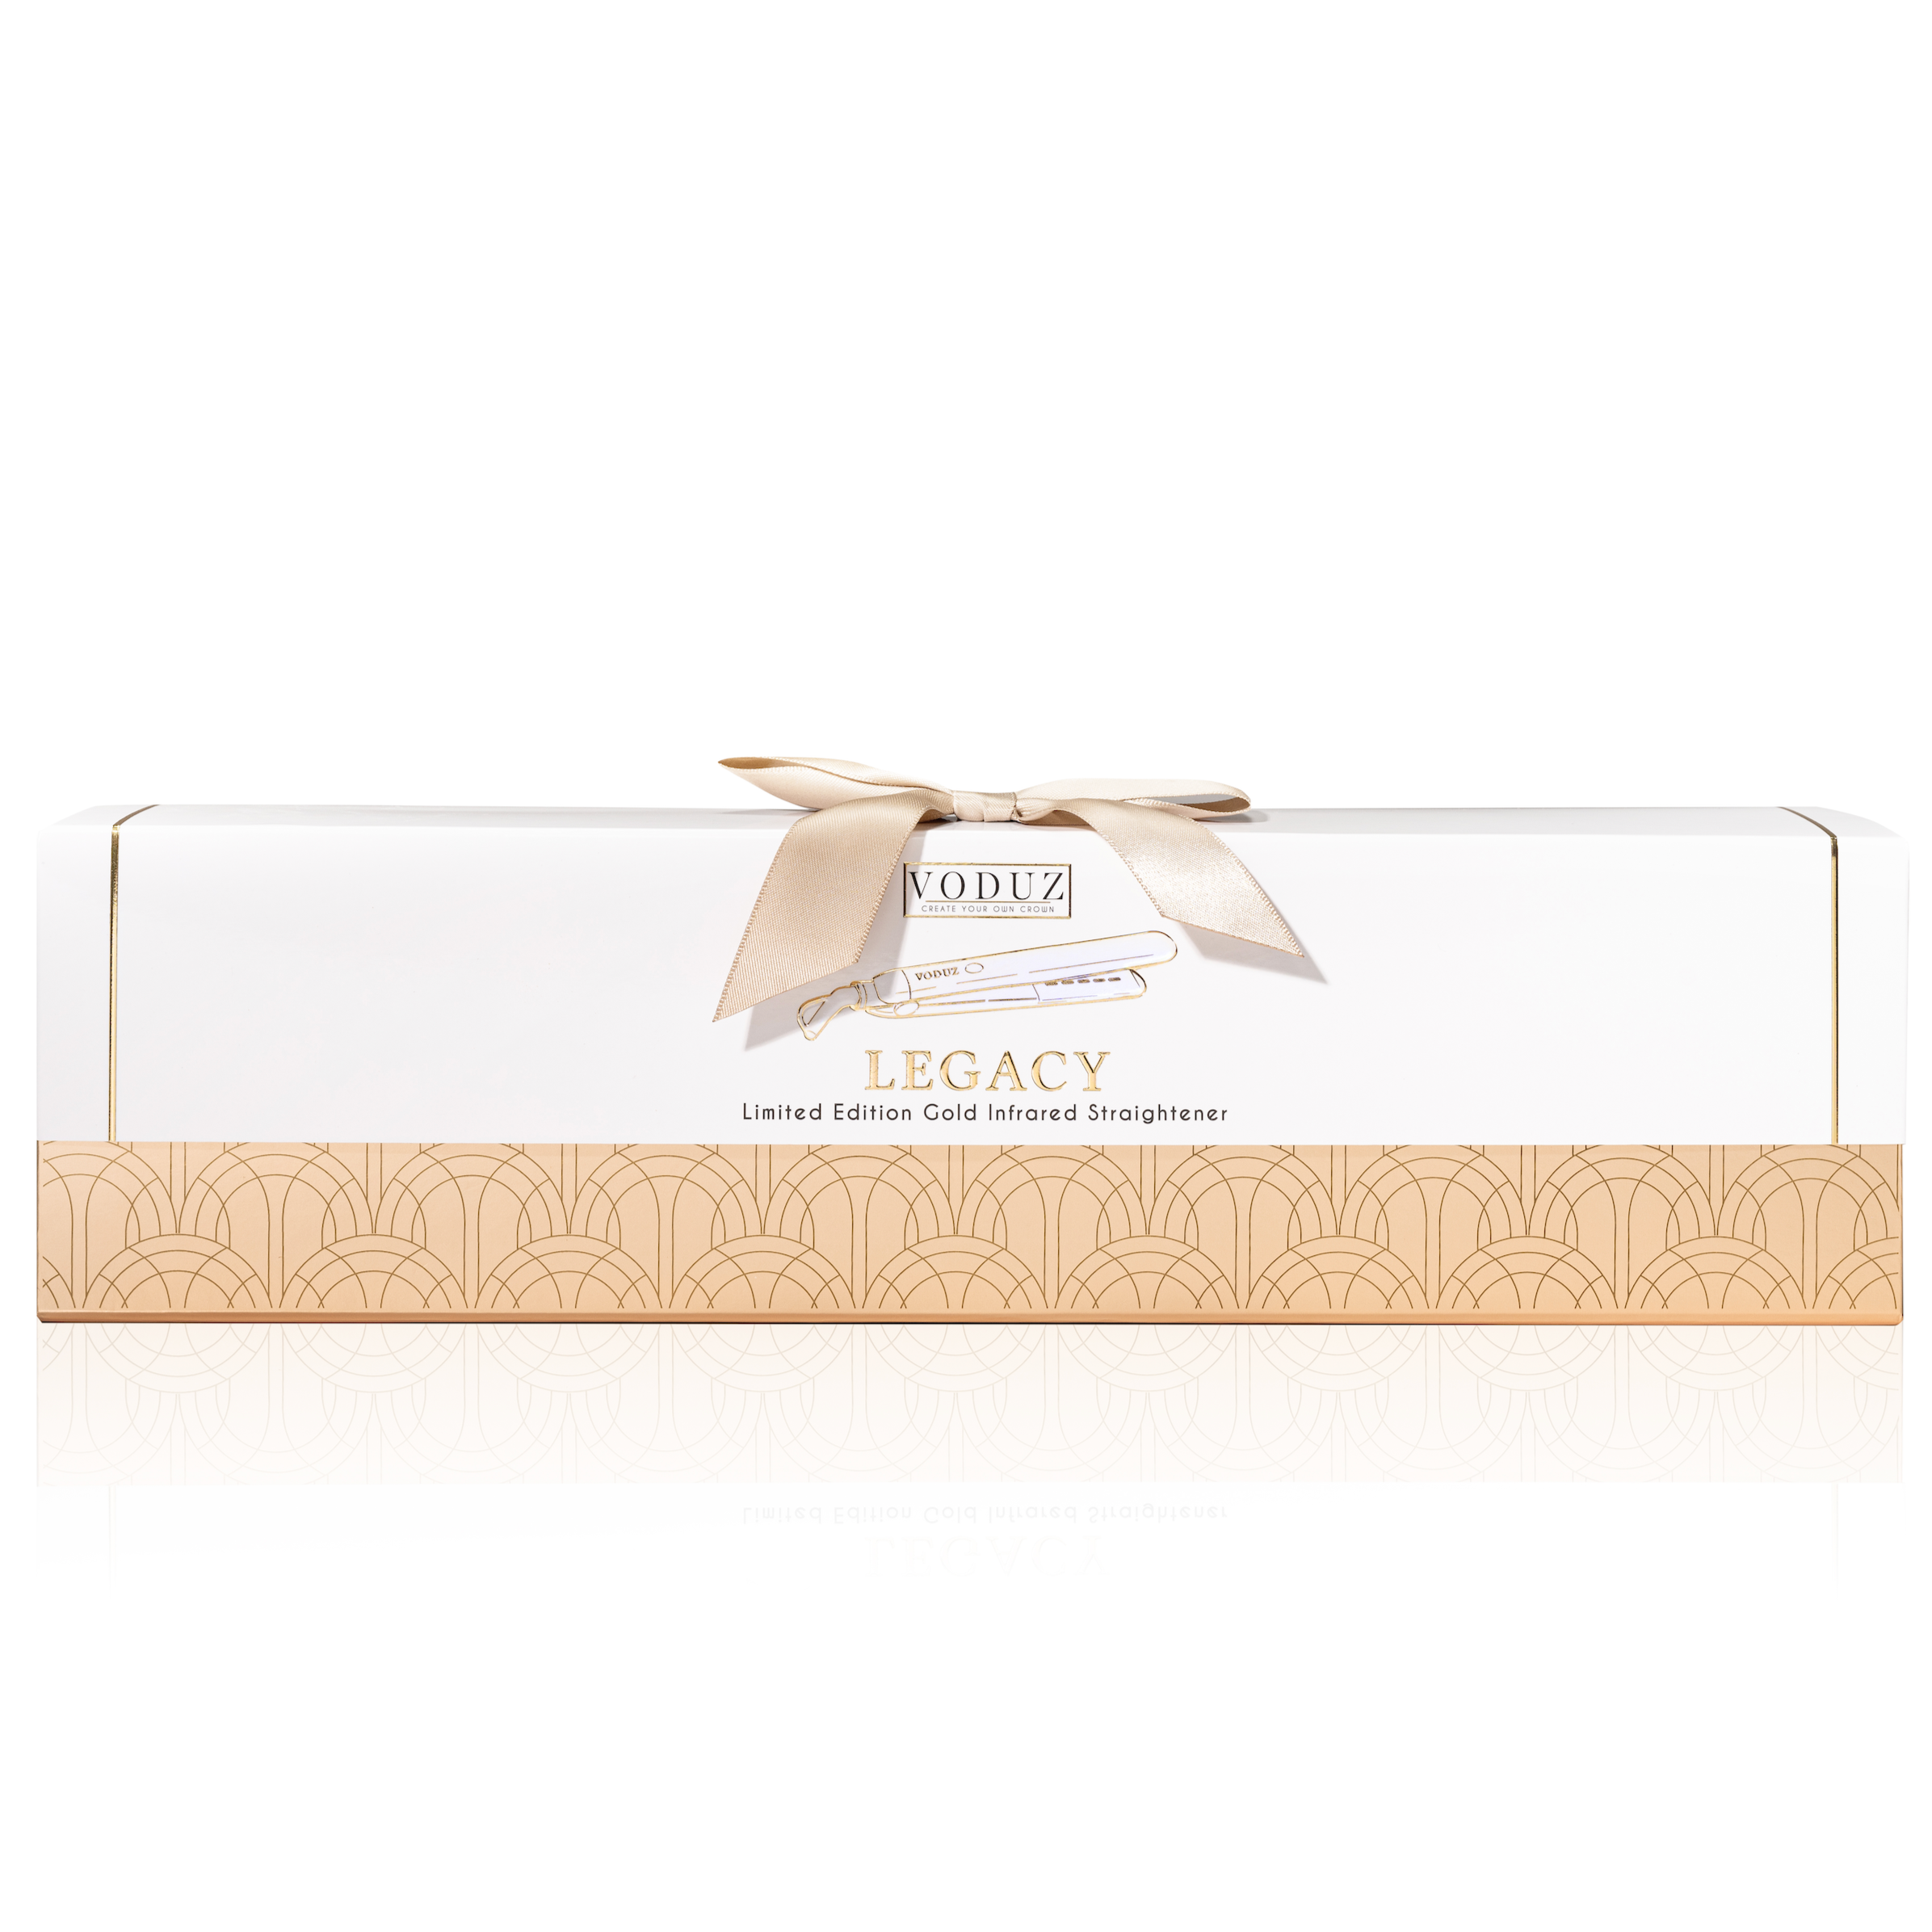 Voduz Legacy Limited Edition Gold Straightener, gold packaging